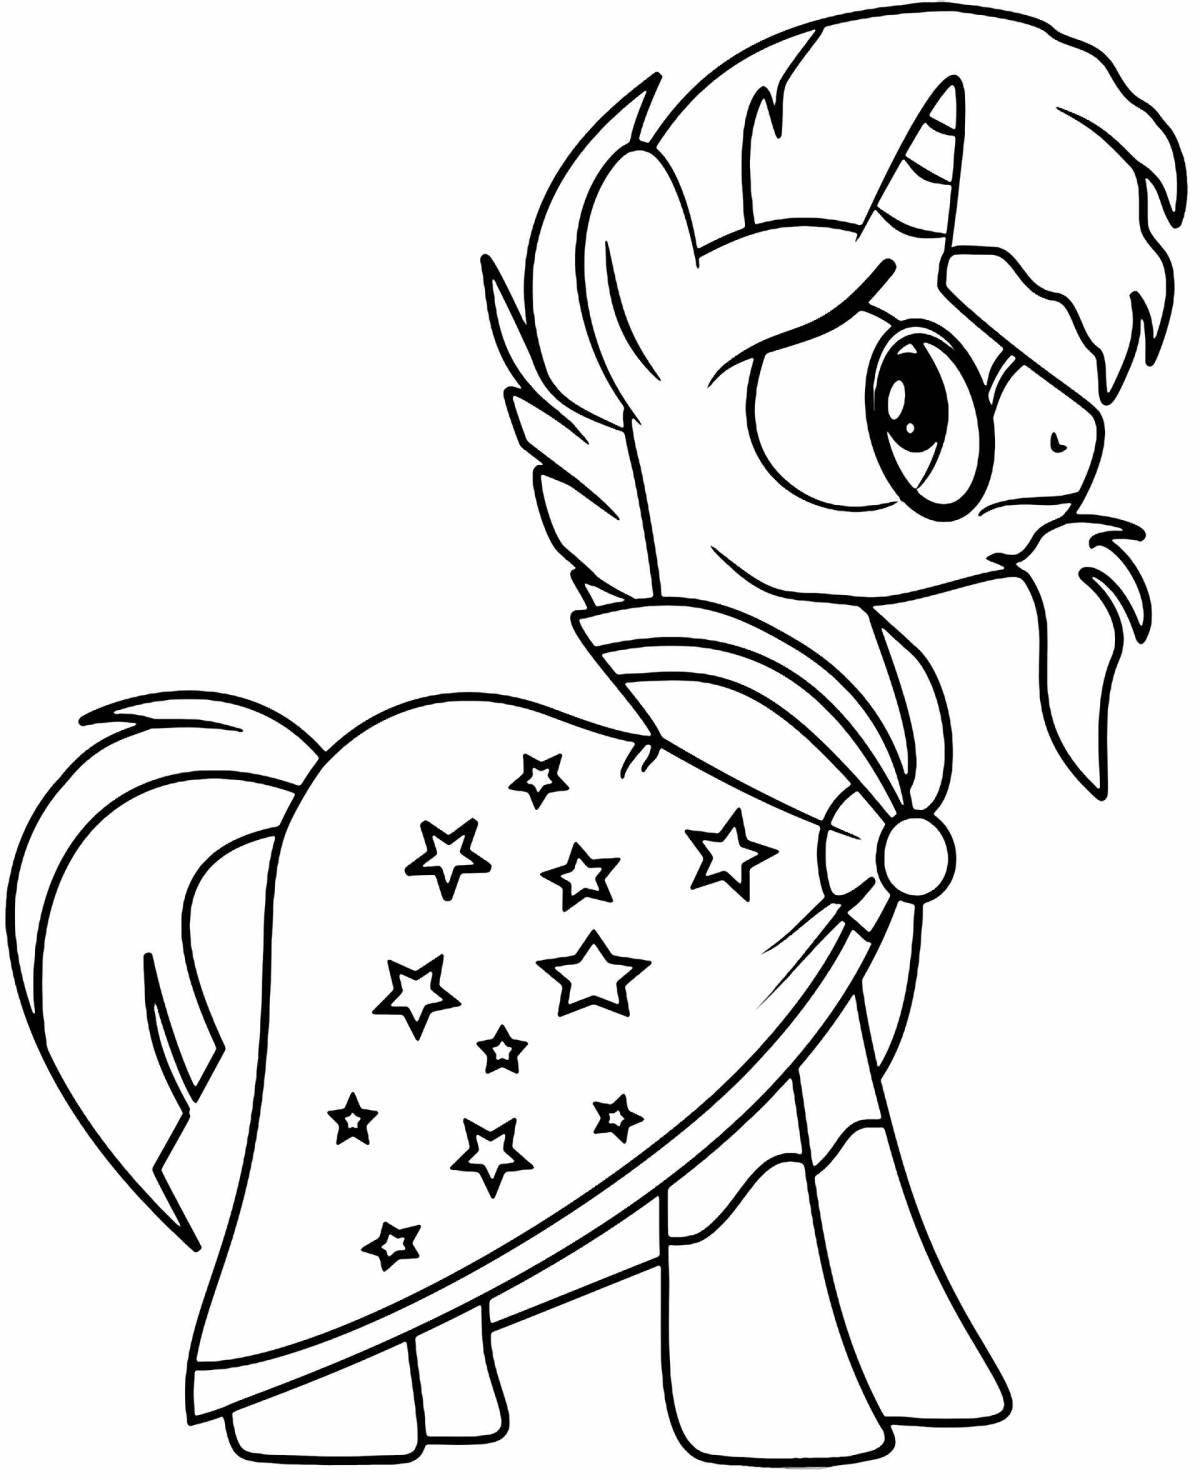 Blessed pip pony coloring page